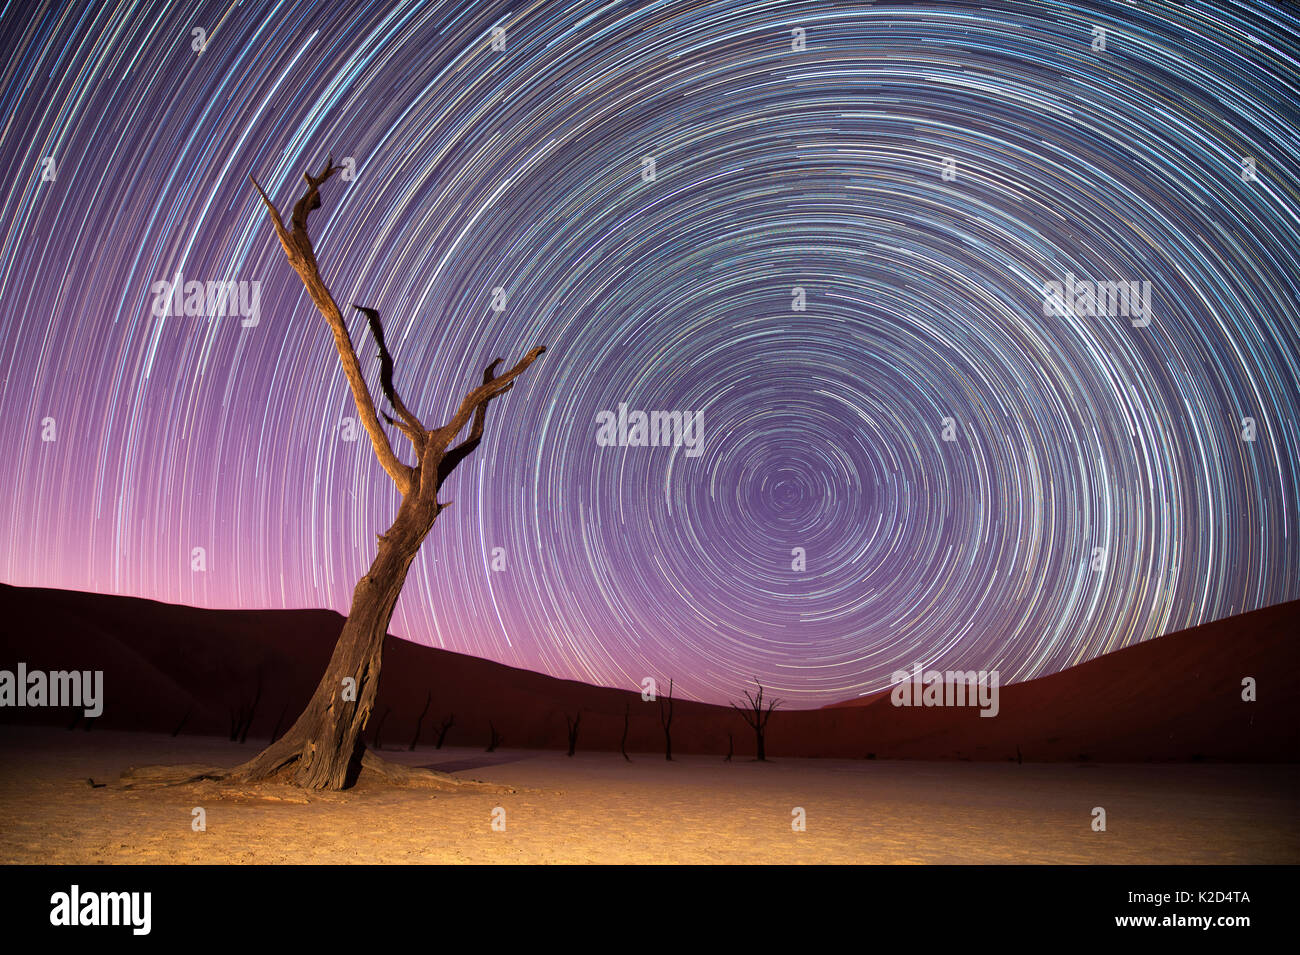 Ancient dead Camelthorn trees (Vachellia erioloba) with red dunes, and star trails, Namib desert, Sossusvlei, Namibia. Composite. Stock Photo